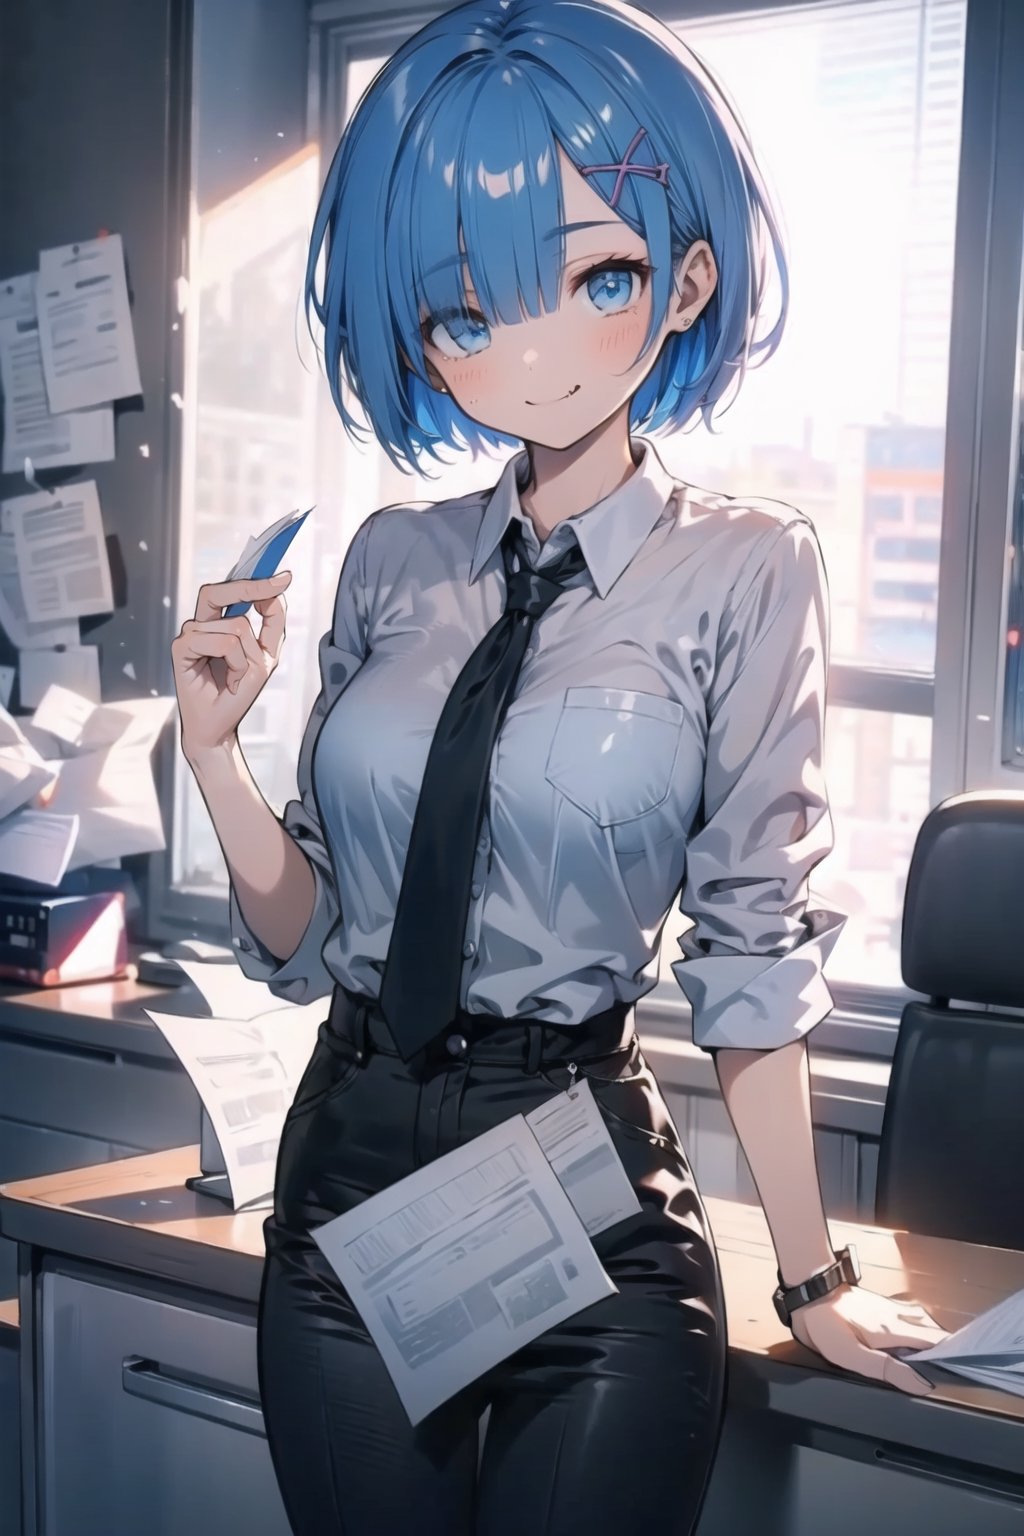  (masterpiece, best quality), (8k wallpaper), (detailed beautiful face and eyes), (detailed illustration), (super fine illustration), (vibrant colors), (professional lighting), 
(increasing the weight makes things worse), 
(One girl 18 old), (girl body:1.3), (medium breast:1.3), blue hair, one fang, eyes (red dark:1.3), smile, (tied hair:1.3), office clothes with breasts see through,Morning Star on desk:1.3), (desk:1.3), background (office:1.3),(flying papers:1.3), Rem , very sexy